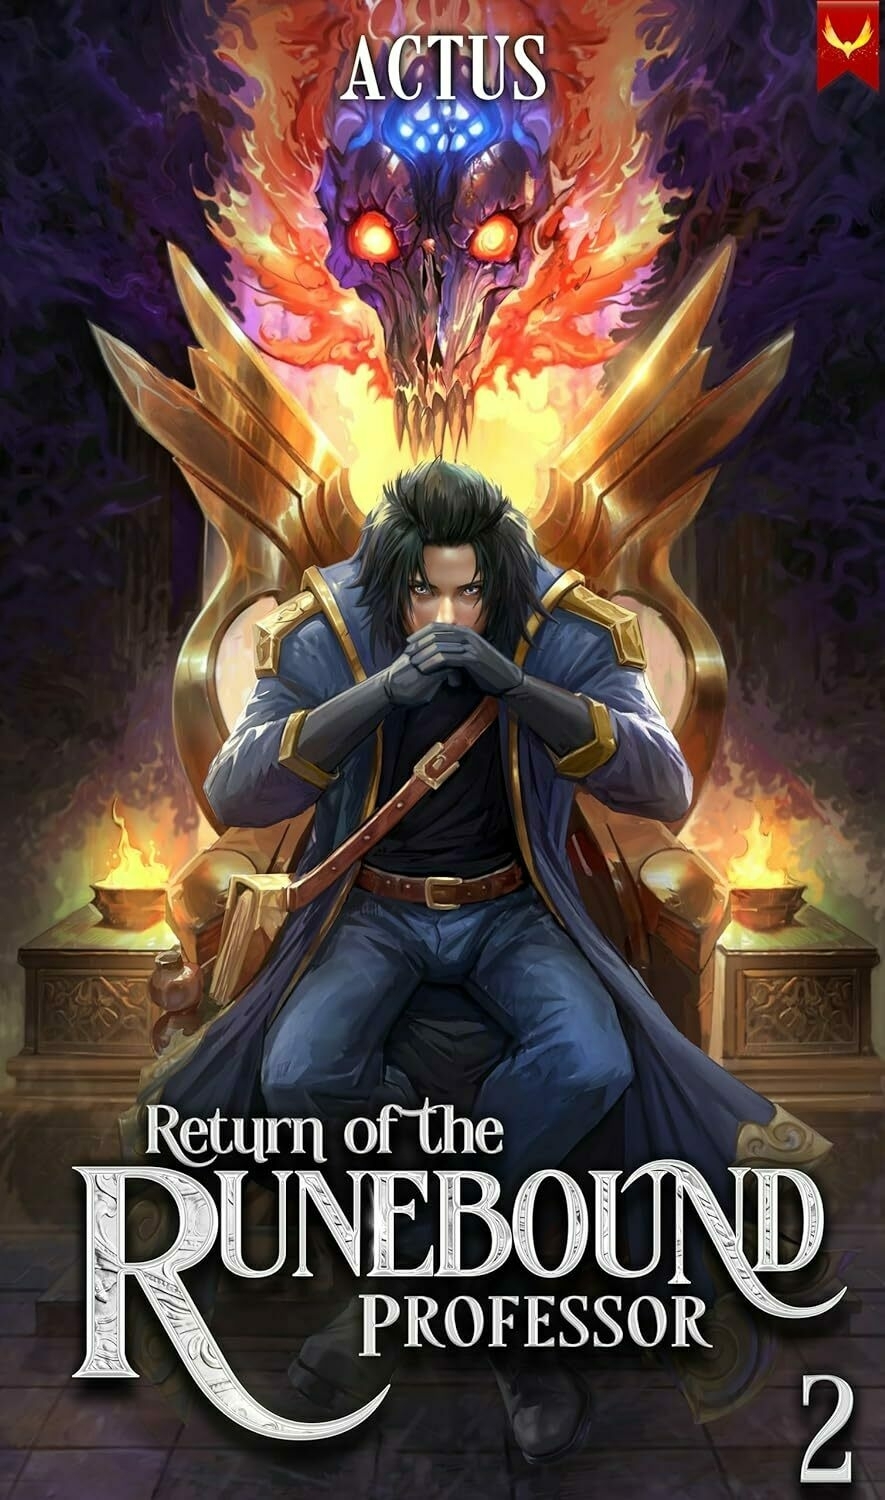 An illustrated man in a blue coat sits pensively below a fierce, spectral dragon-like creature. Text reads: 'ACTUS, Return of the RUNEBOUND PROFESSOR 2.'